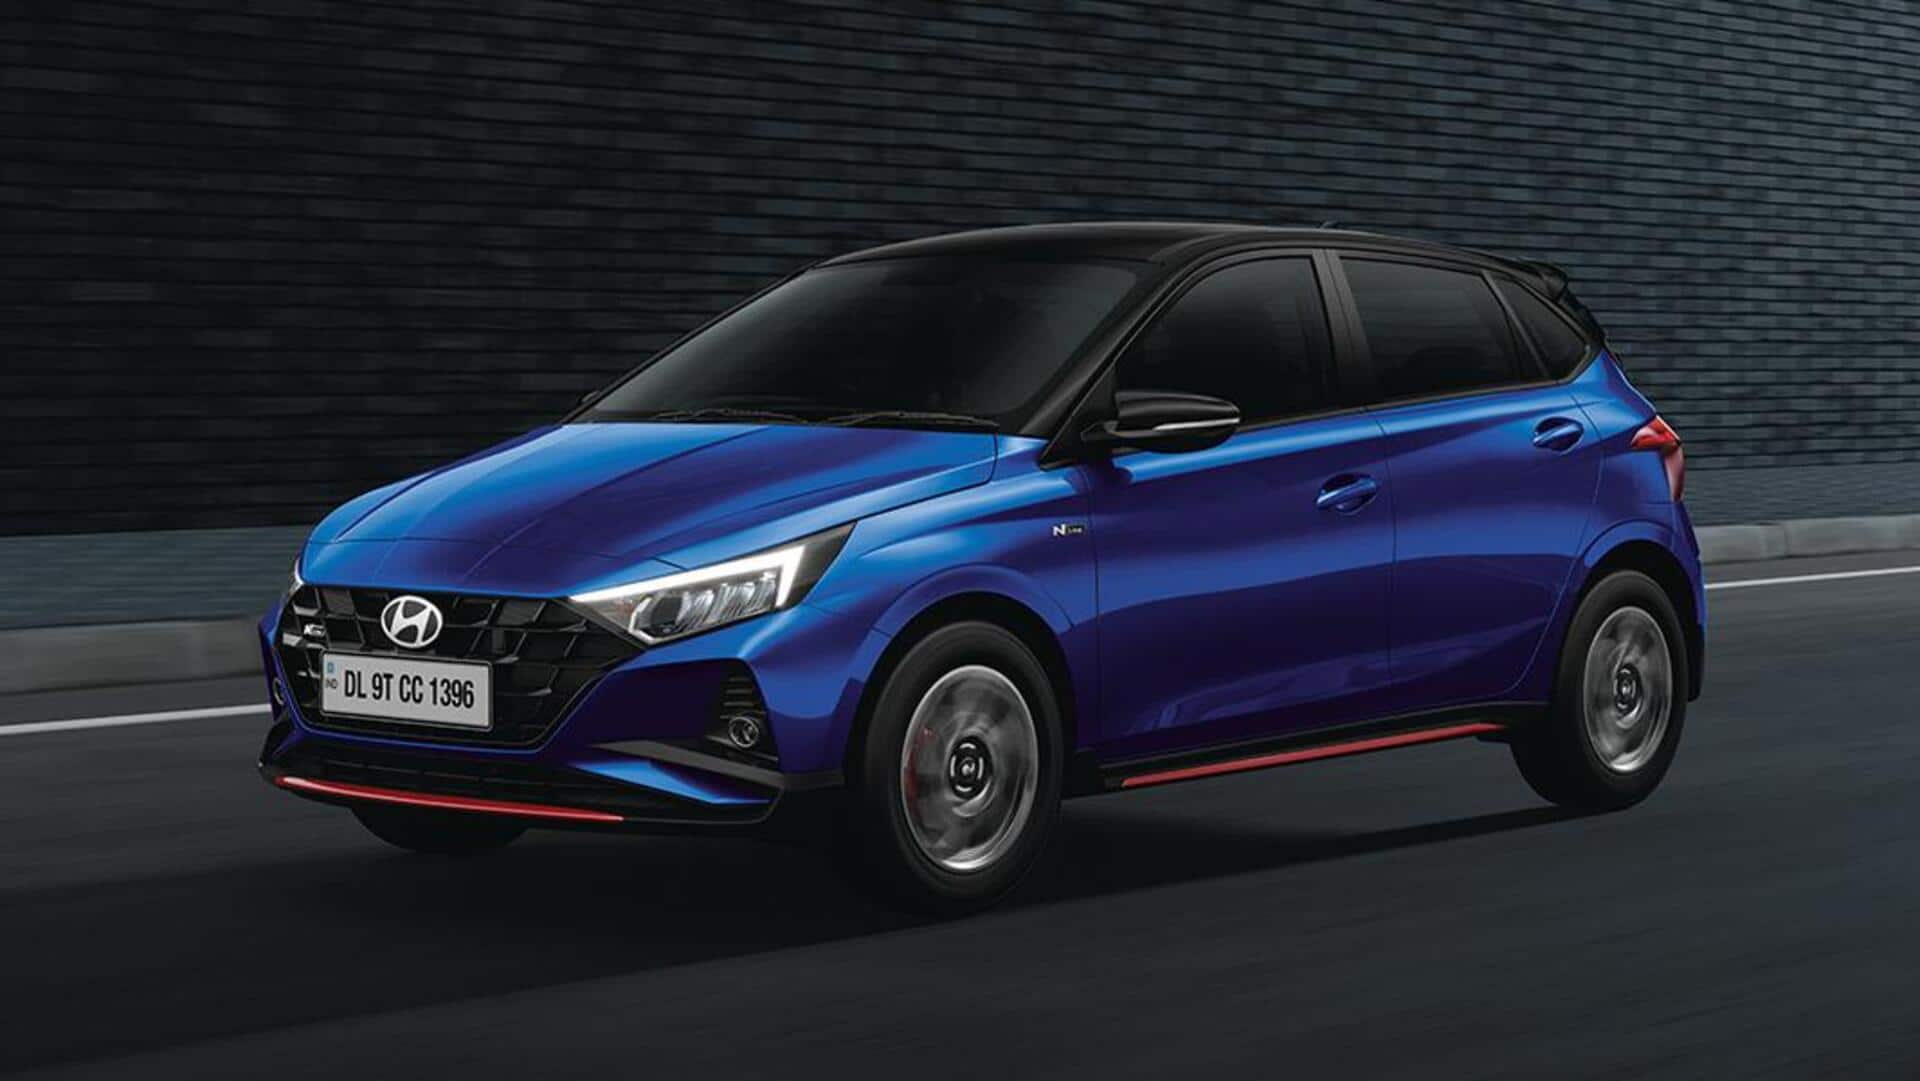 Hyundai i20 range becomes costlier in India: Check new prices